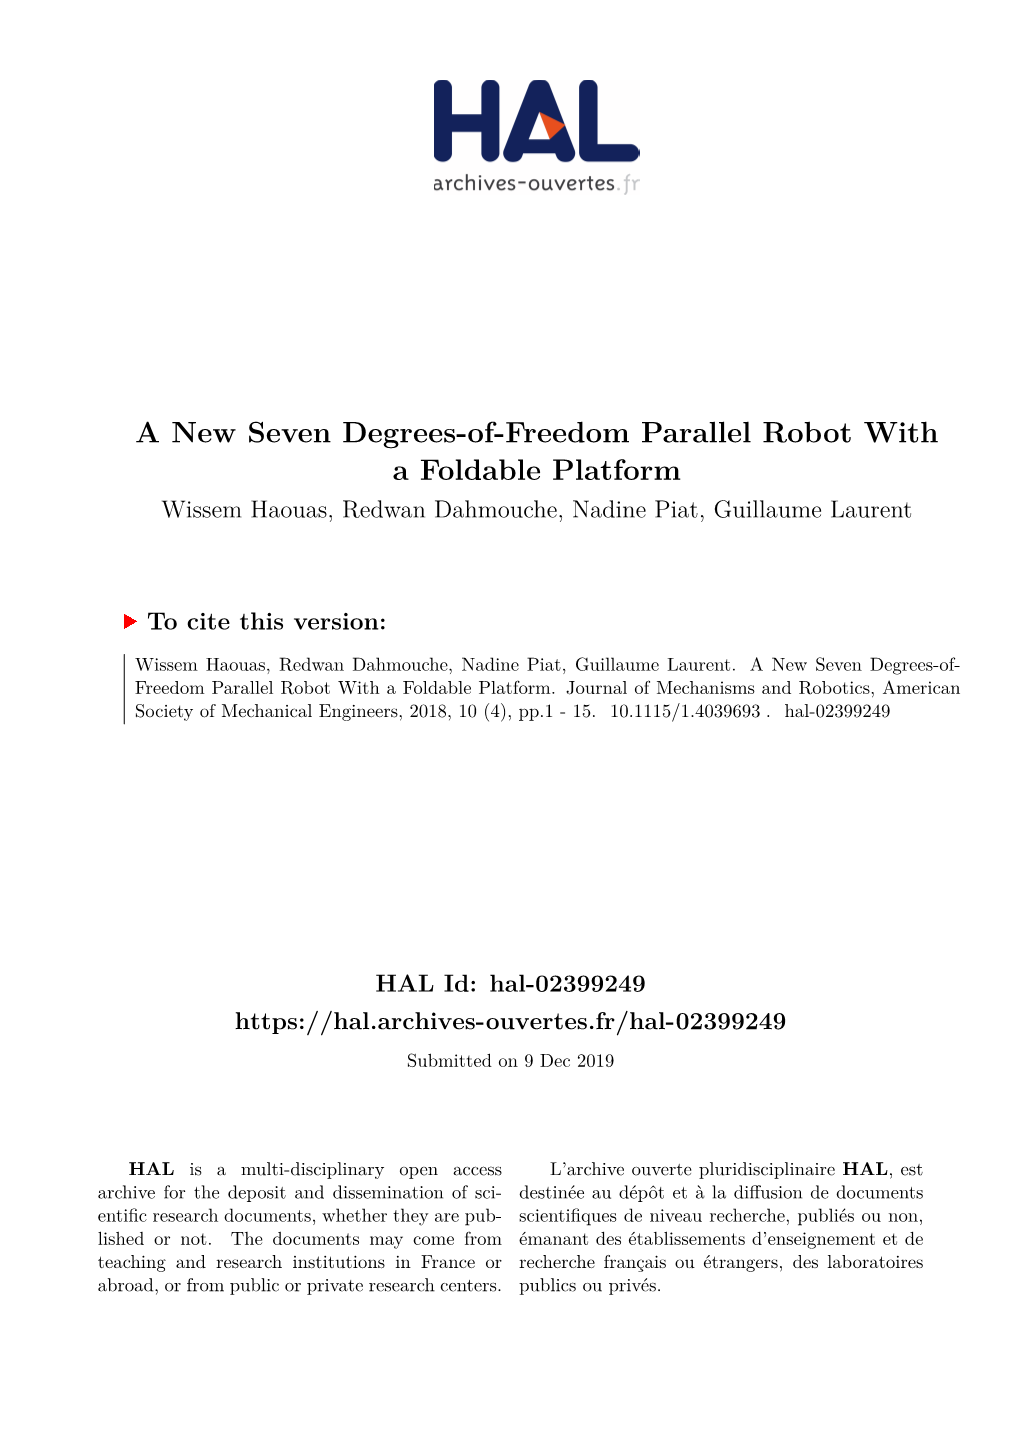 A New Seven Degrees-Of-Freedom Parallel Robot with a Foldable Platform Wissem Haouas, Redwan Dahmouche, Nadine Piat, Guillaume Laurent